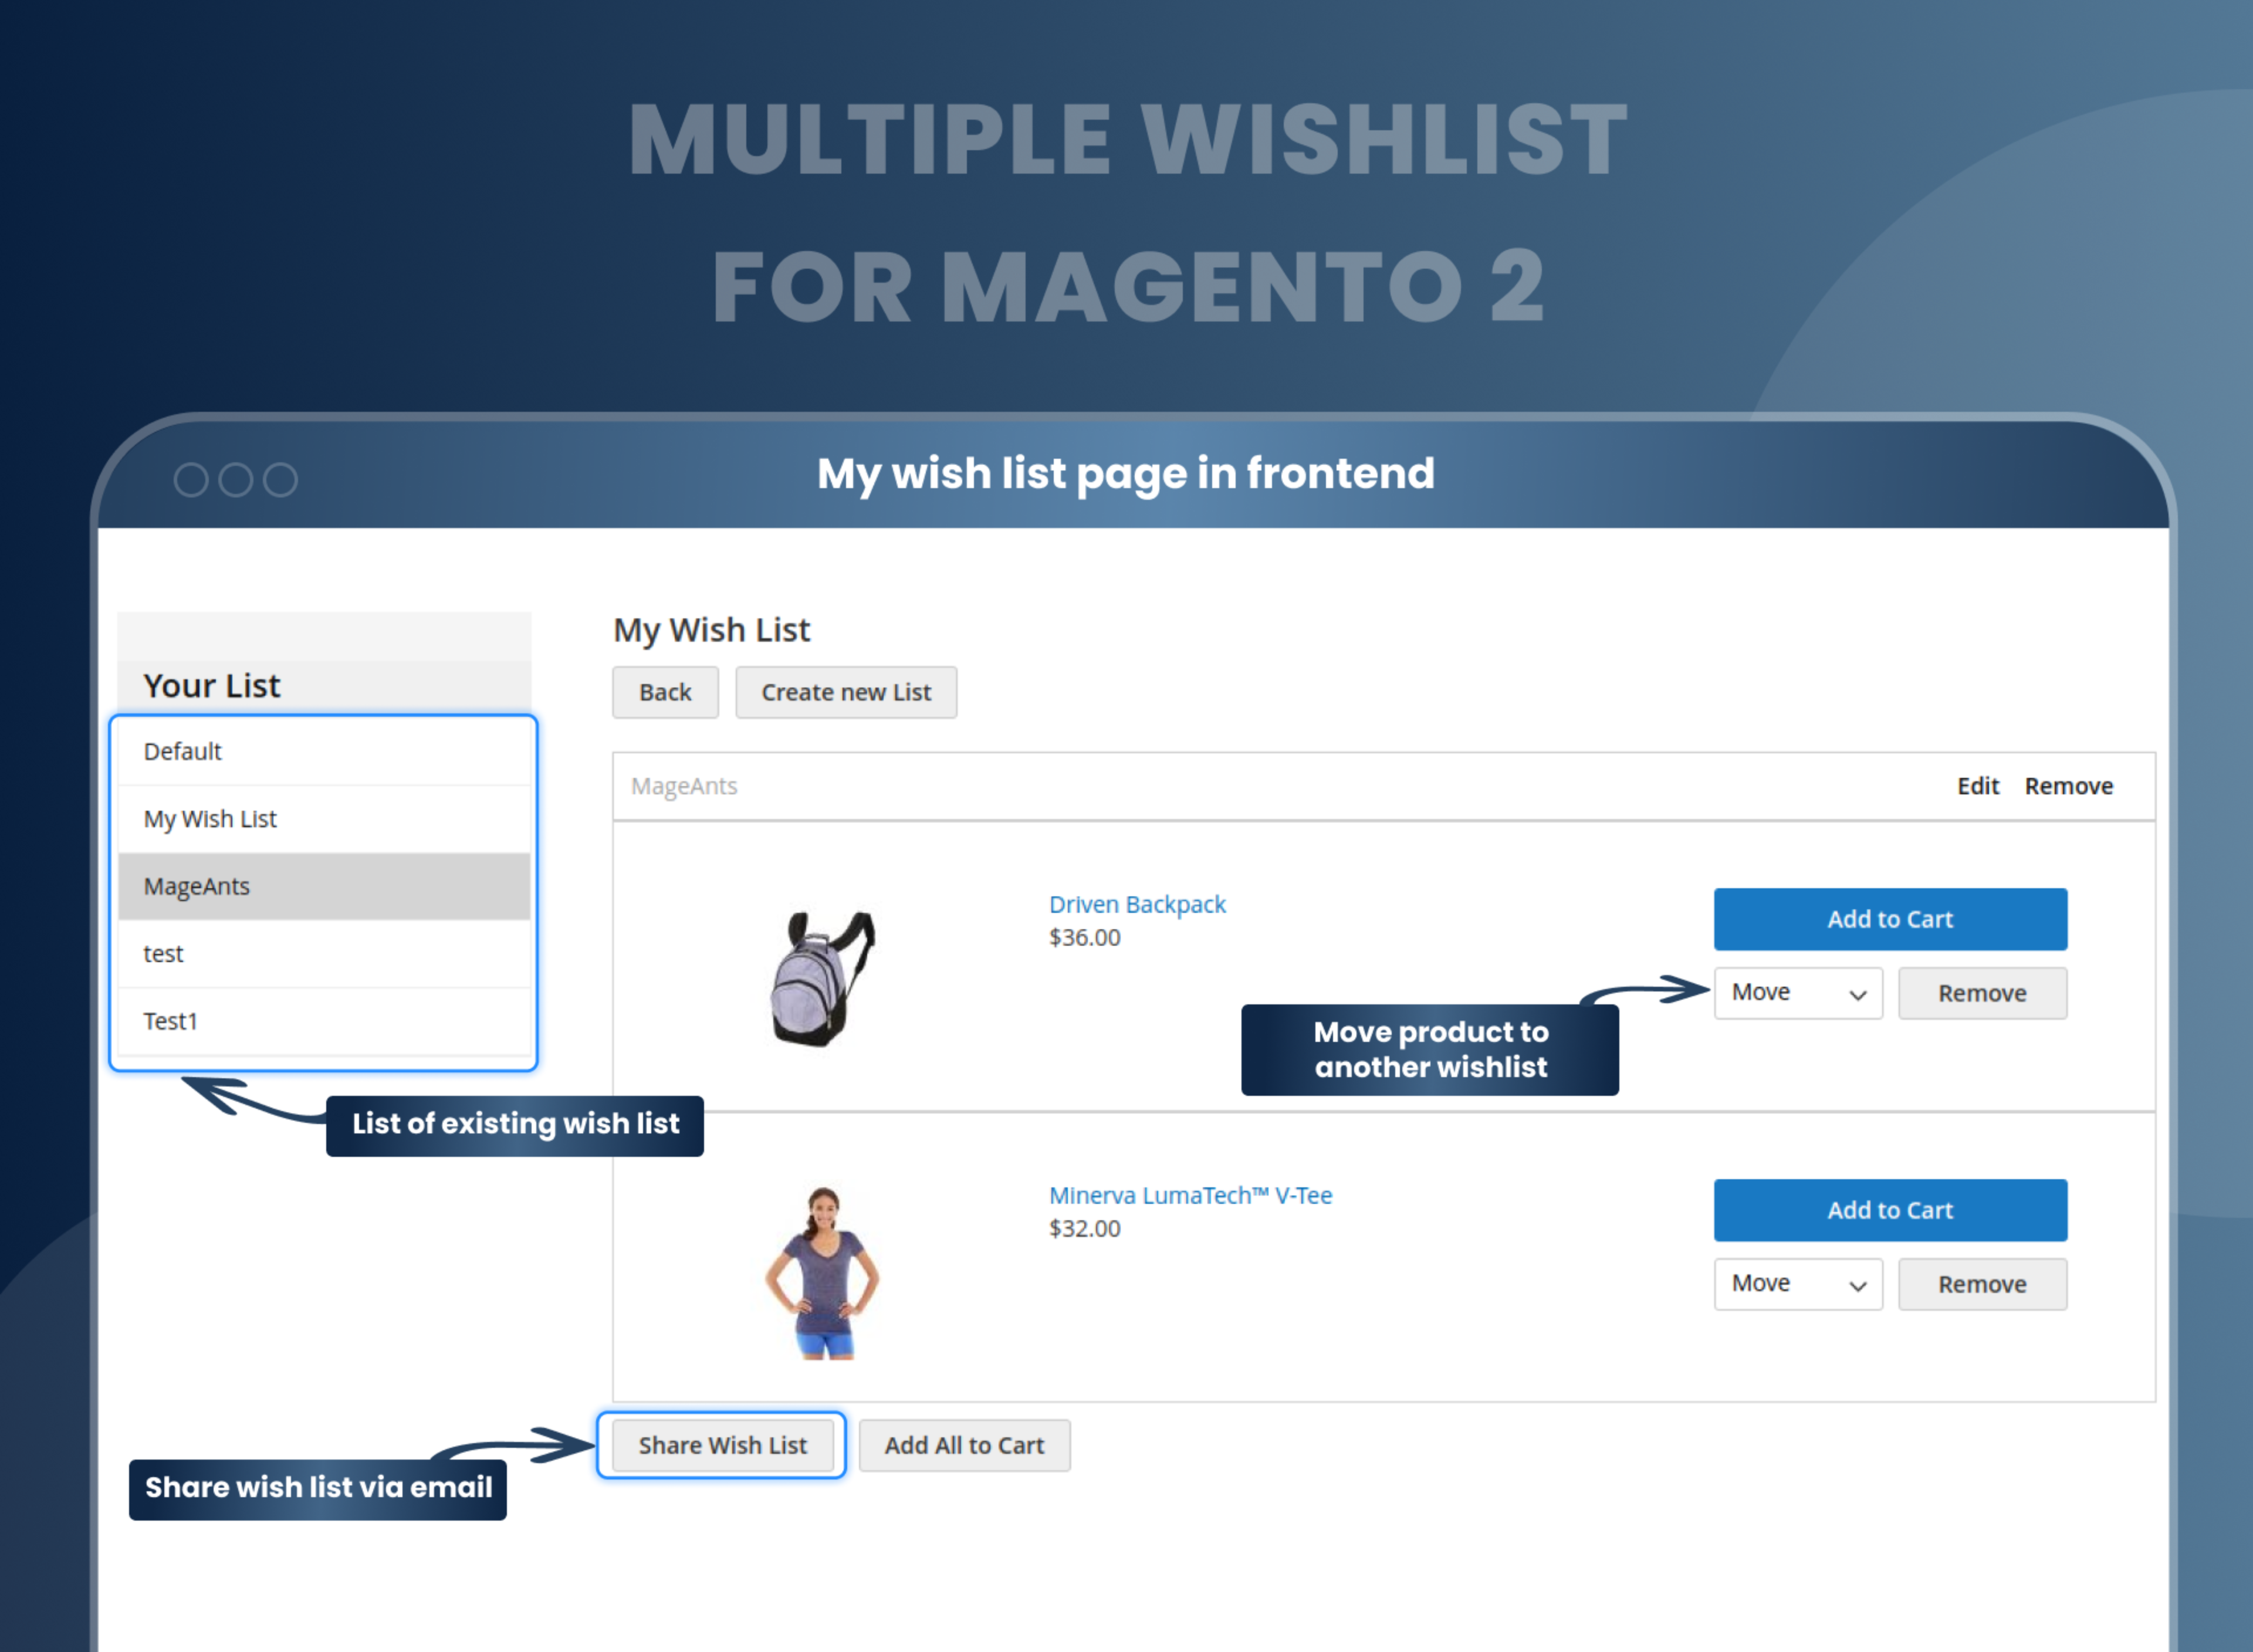 My wish list page in frontend